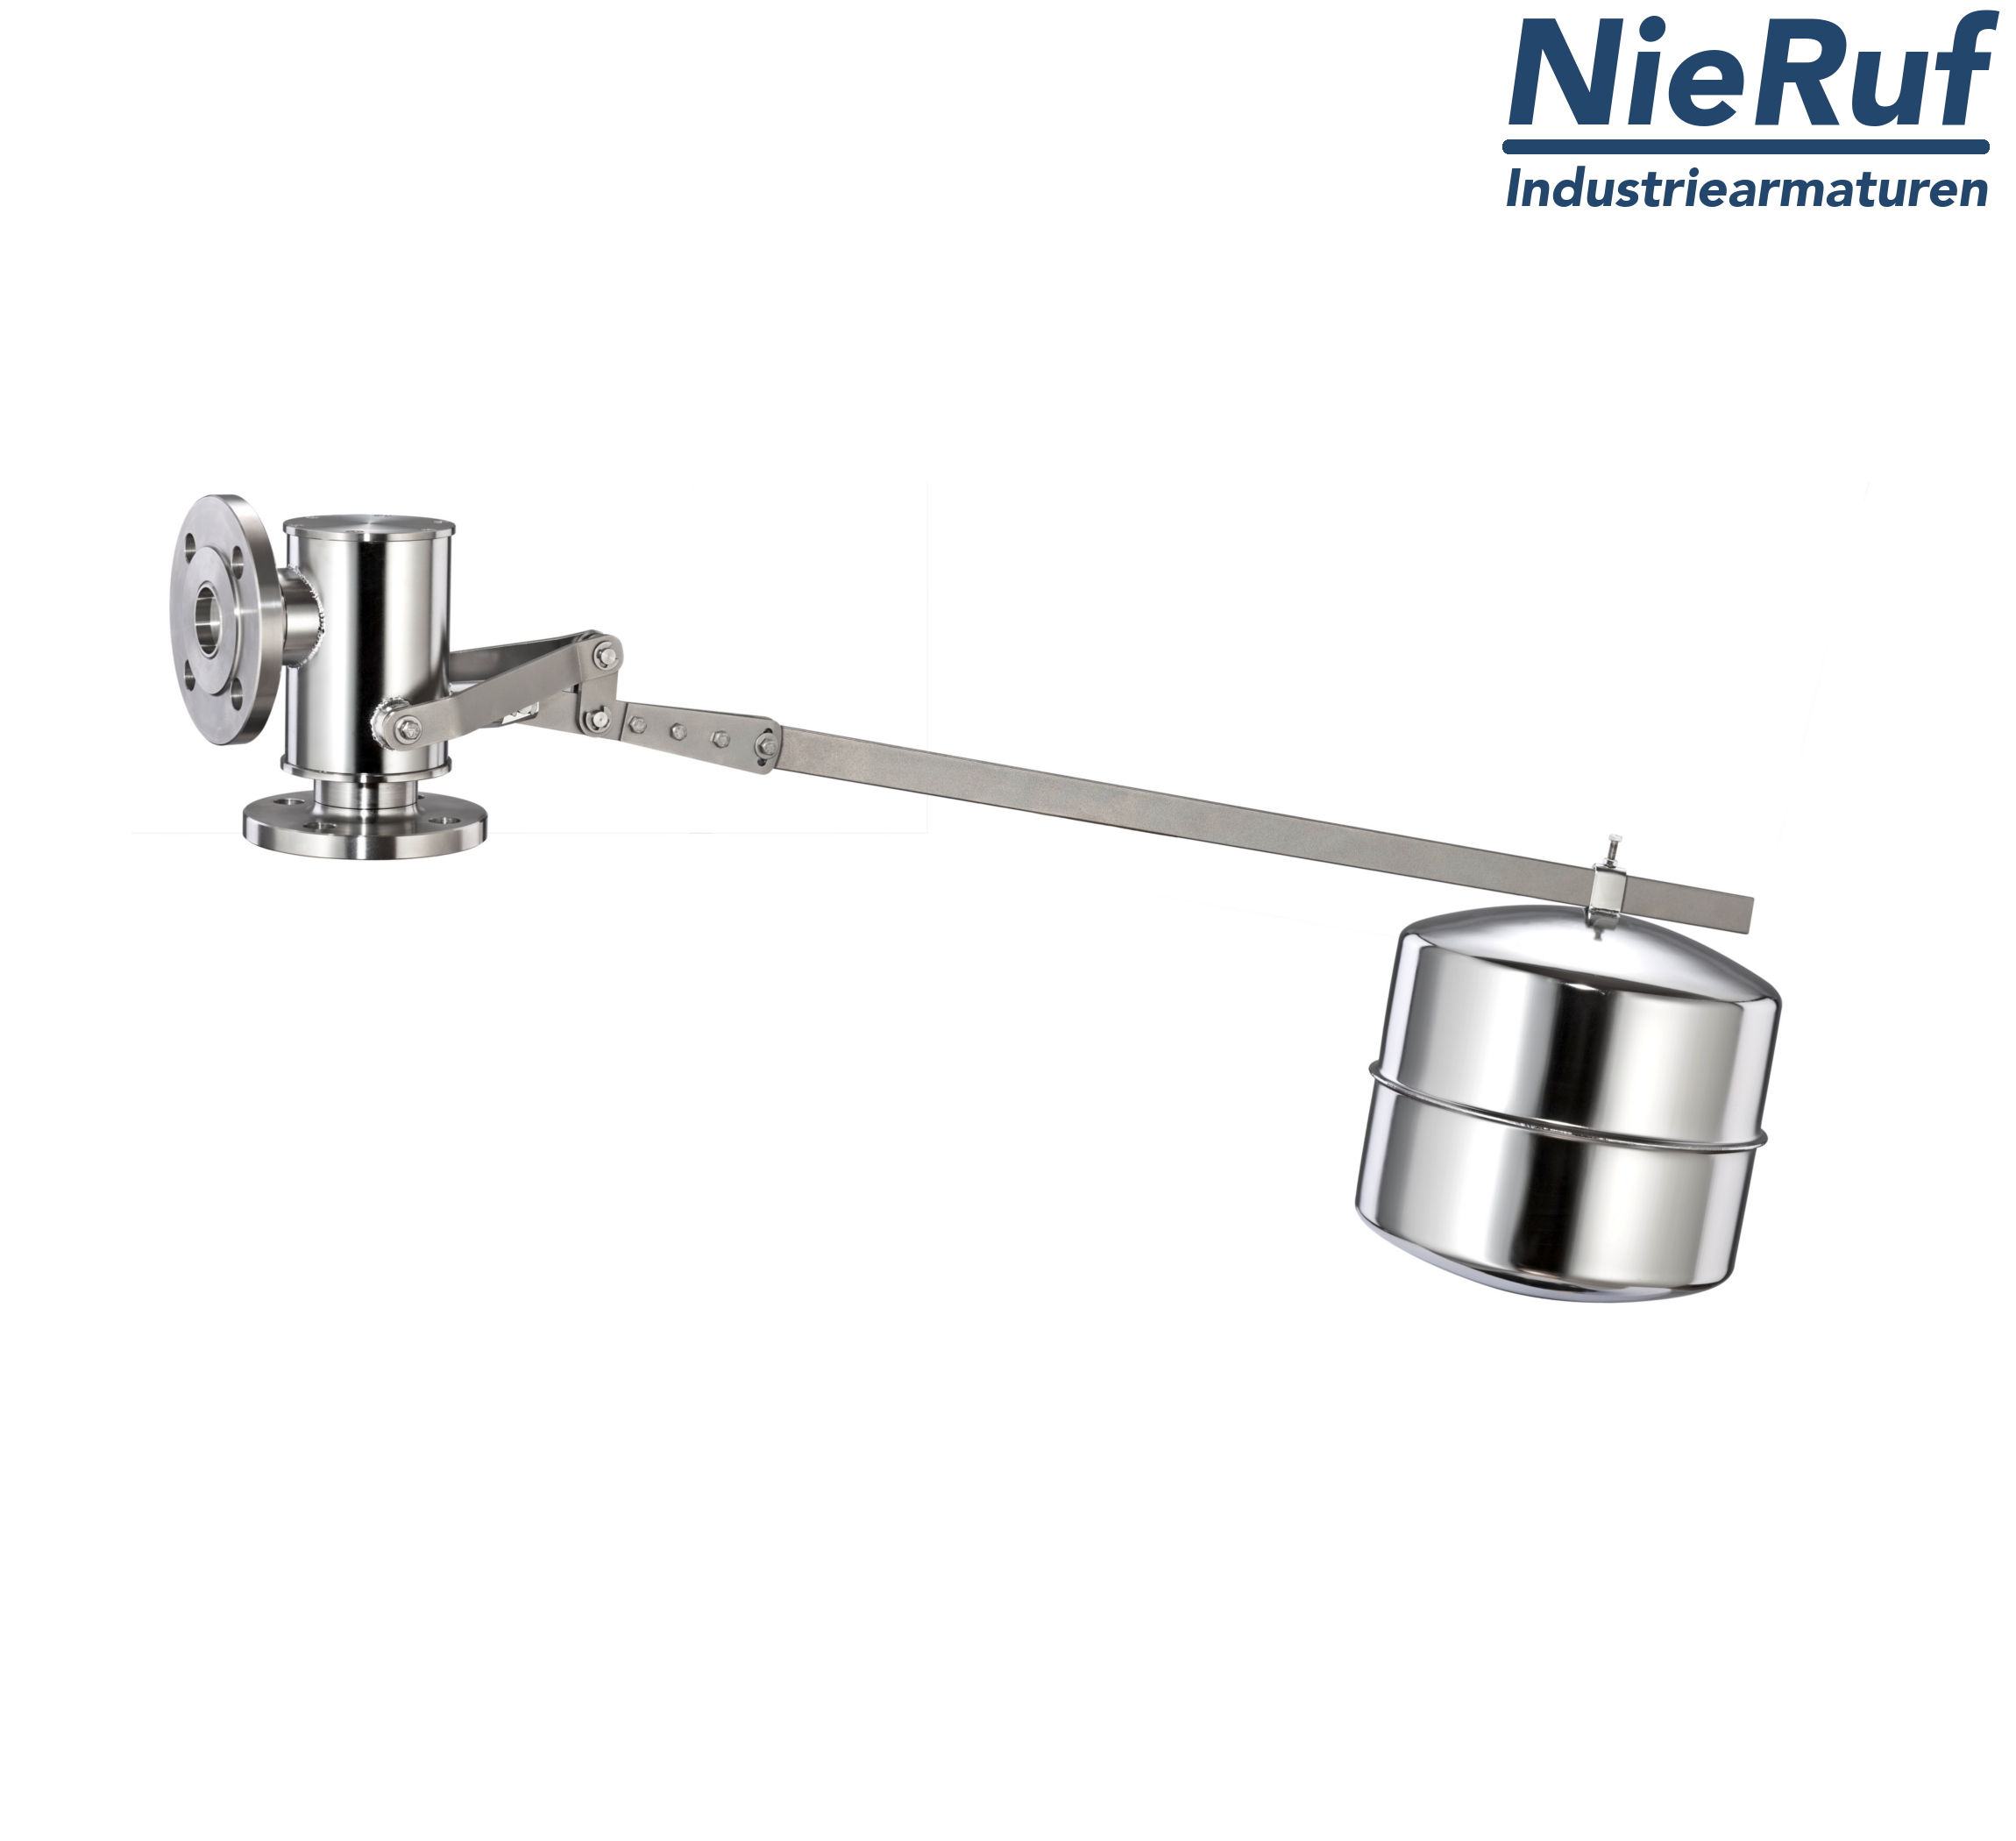 Float valve DN50 - 2" stainless steel FKM SW07 floats: in stainless steel